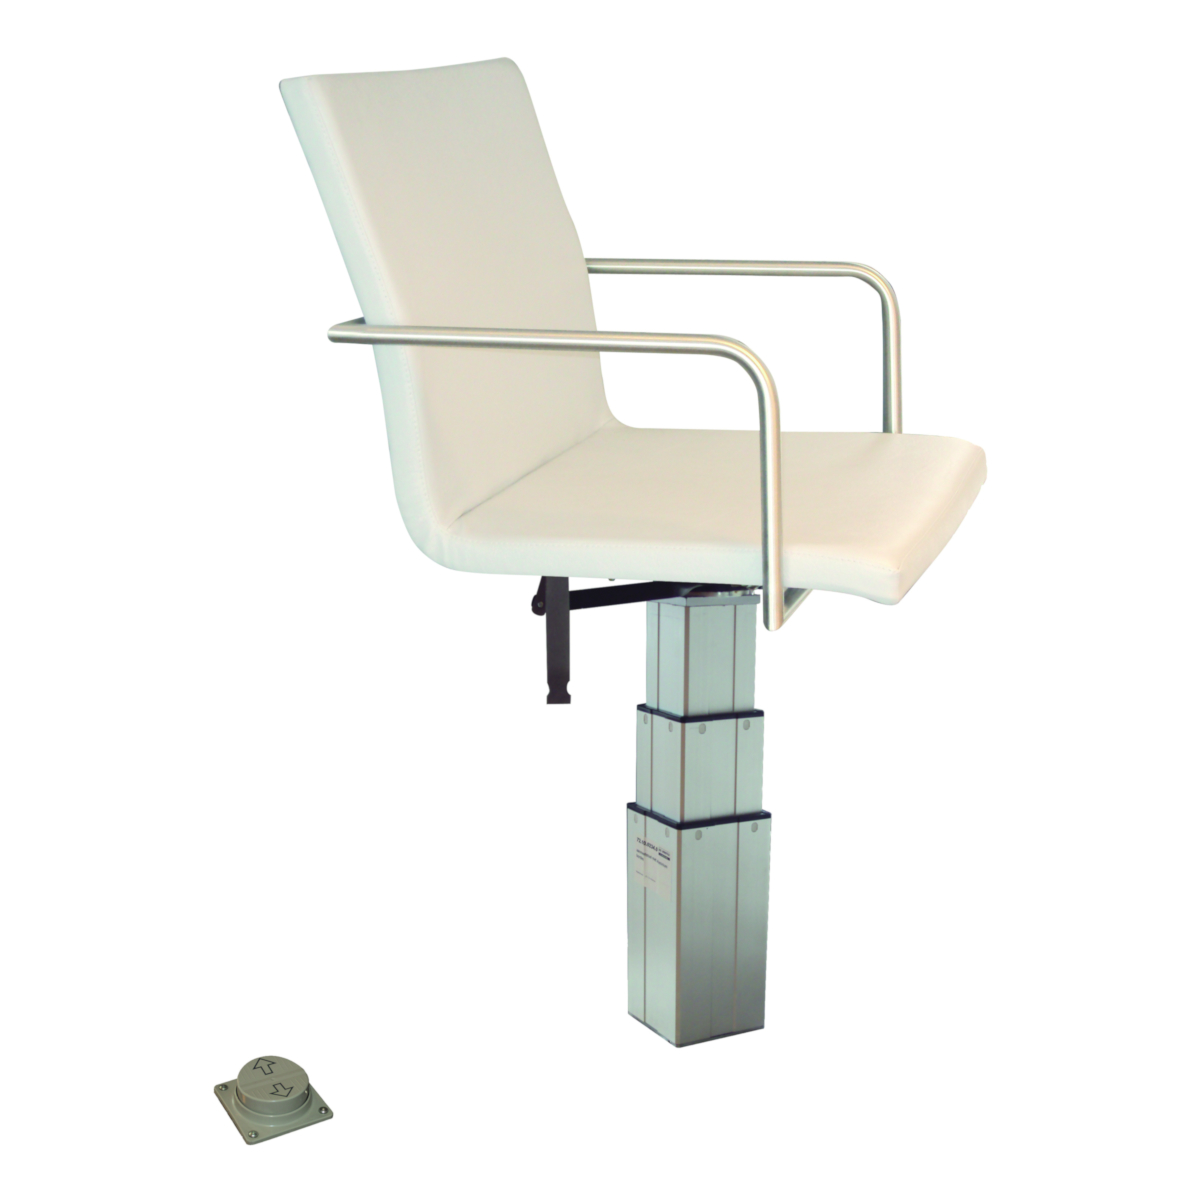 Chair For Taking Measurements W O Base Ottobock Us B2b Site